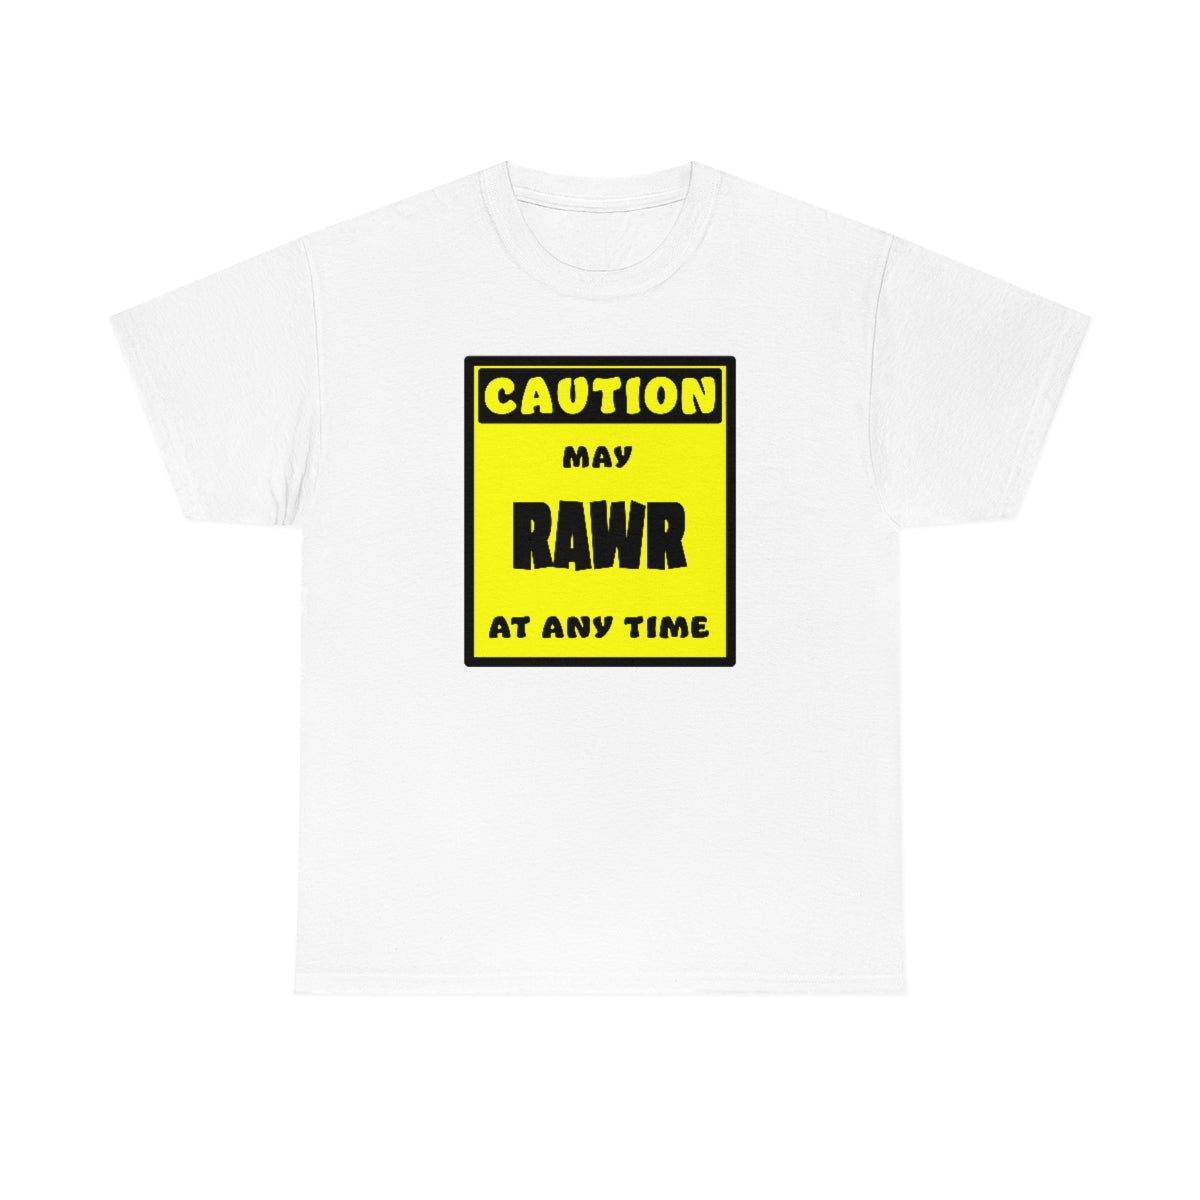 CAUTION! May RAWR at any time! - T-Shirt T-Shirt Artworktee White S 